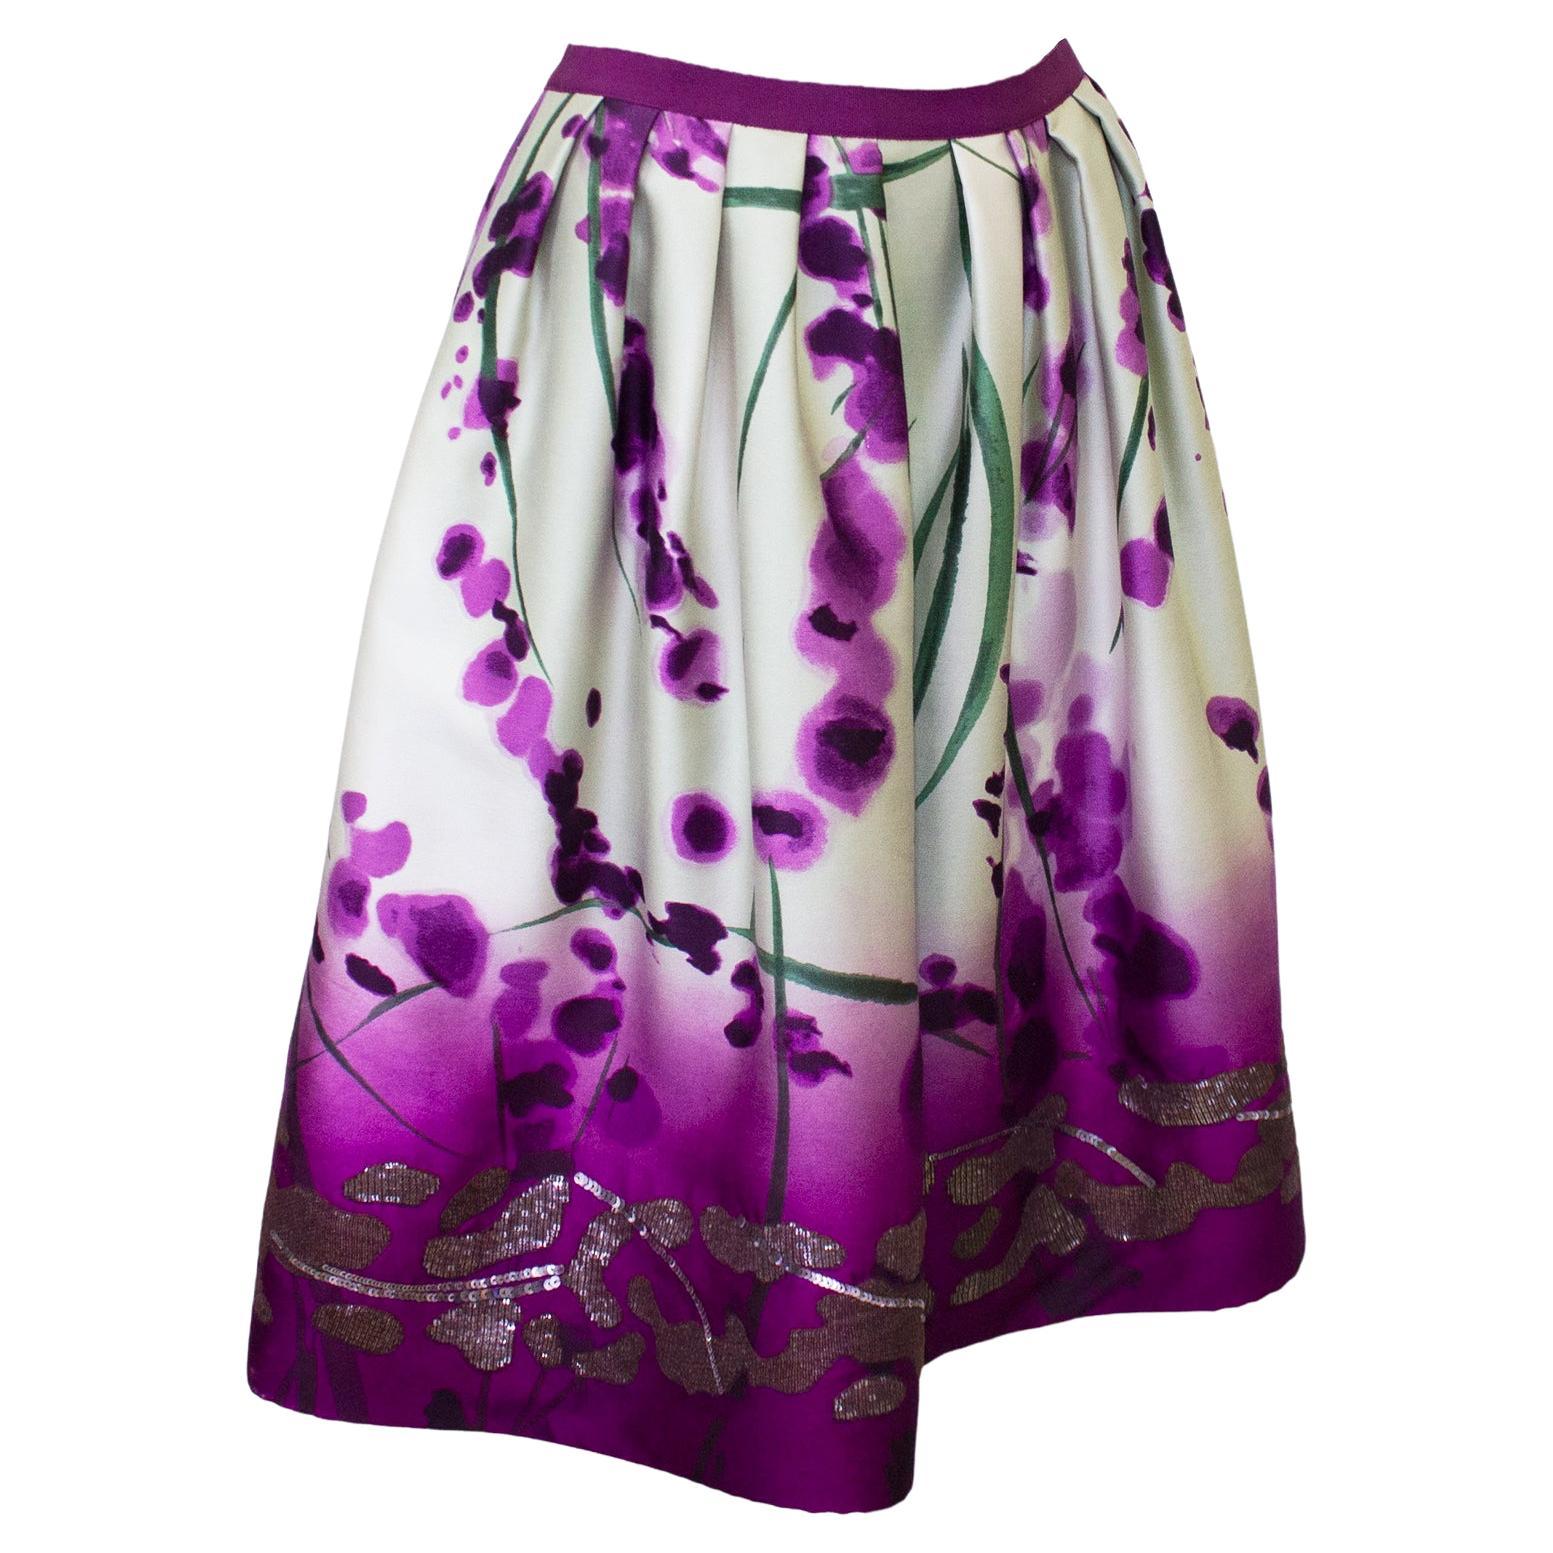 Late 90s Oscar de la Renta silk blend skirt featuring a beautiful watercolor printed purple floral pattern and finished with a sequin adorned hem. The skirt goes from light to dark at the hem and flares out from the waist. In excellent condition,